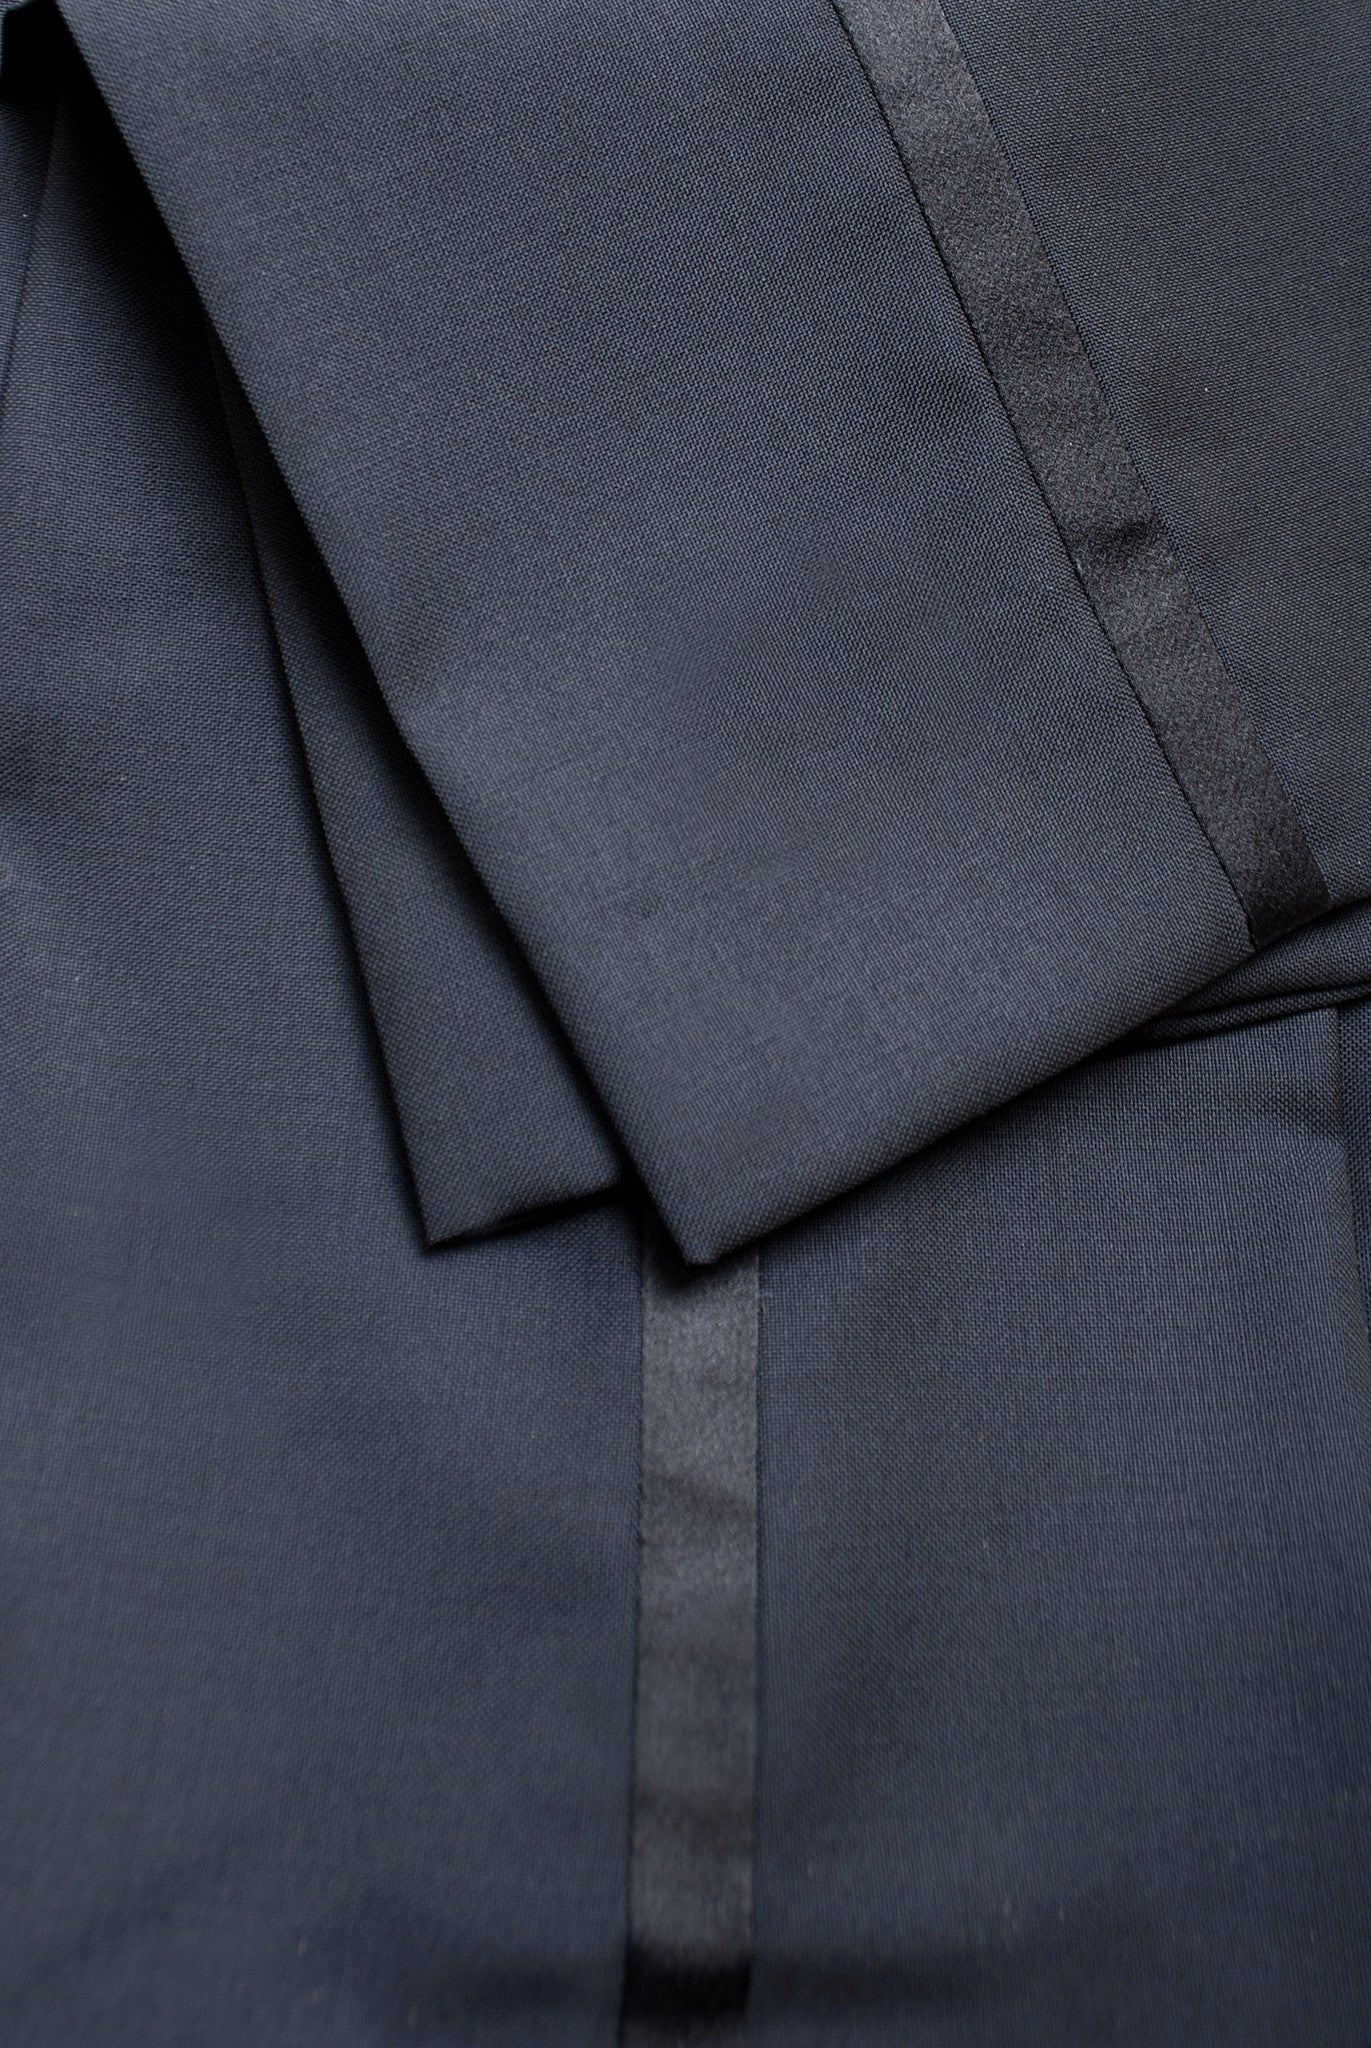 Close up of Brooklyn Tailors BKT50 Tuxedo Trouser in Super 110s - Black with Satin Stripe showing satin stripe and fabric texture